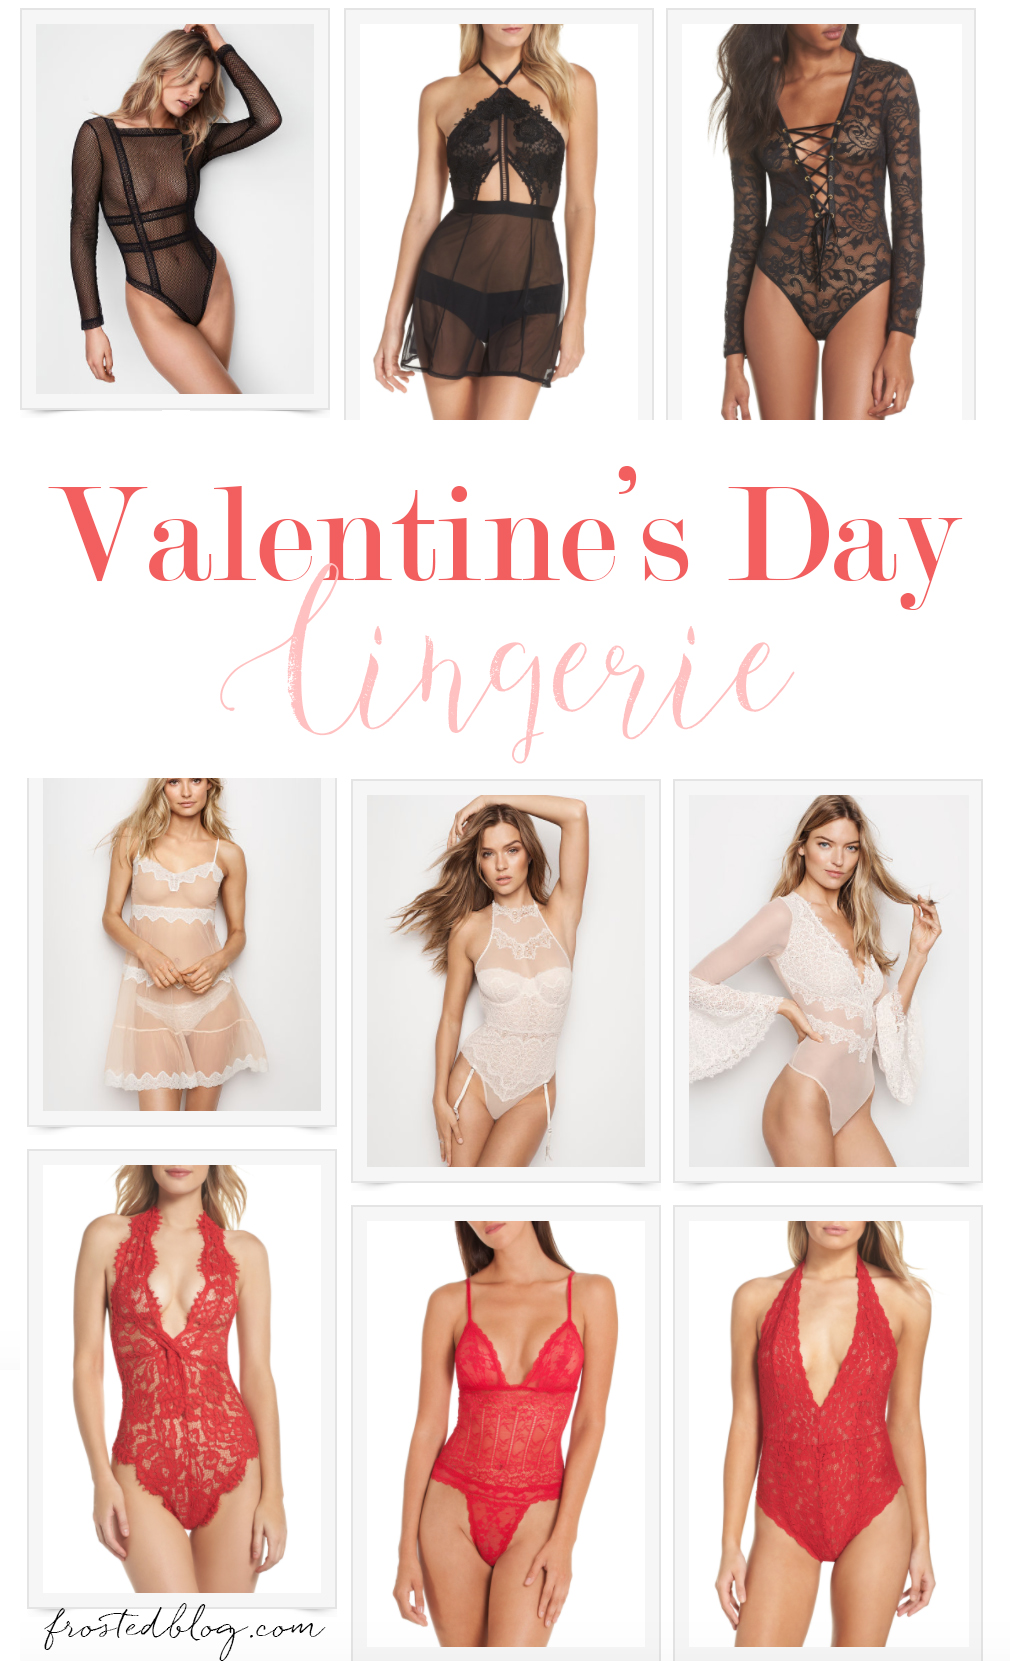 https://frostedevents.com/valentines-day-lingerie/valentines-day-lingerie-valentine-gifts-for-her-guide-frostedblog/